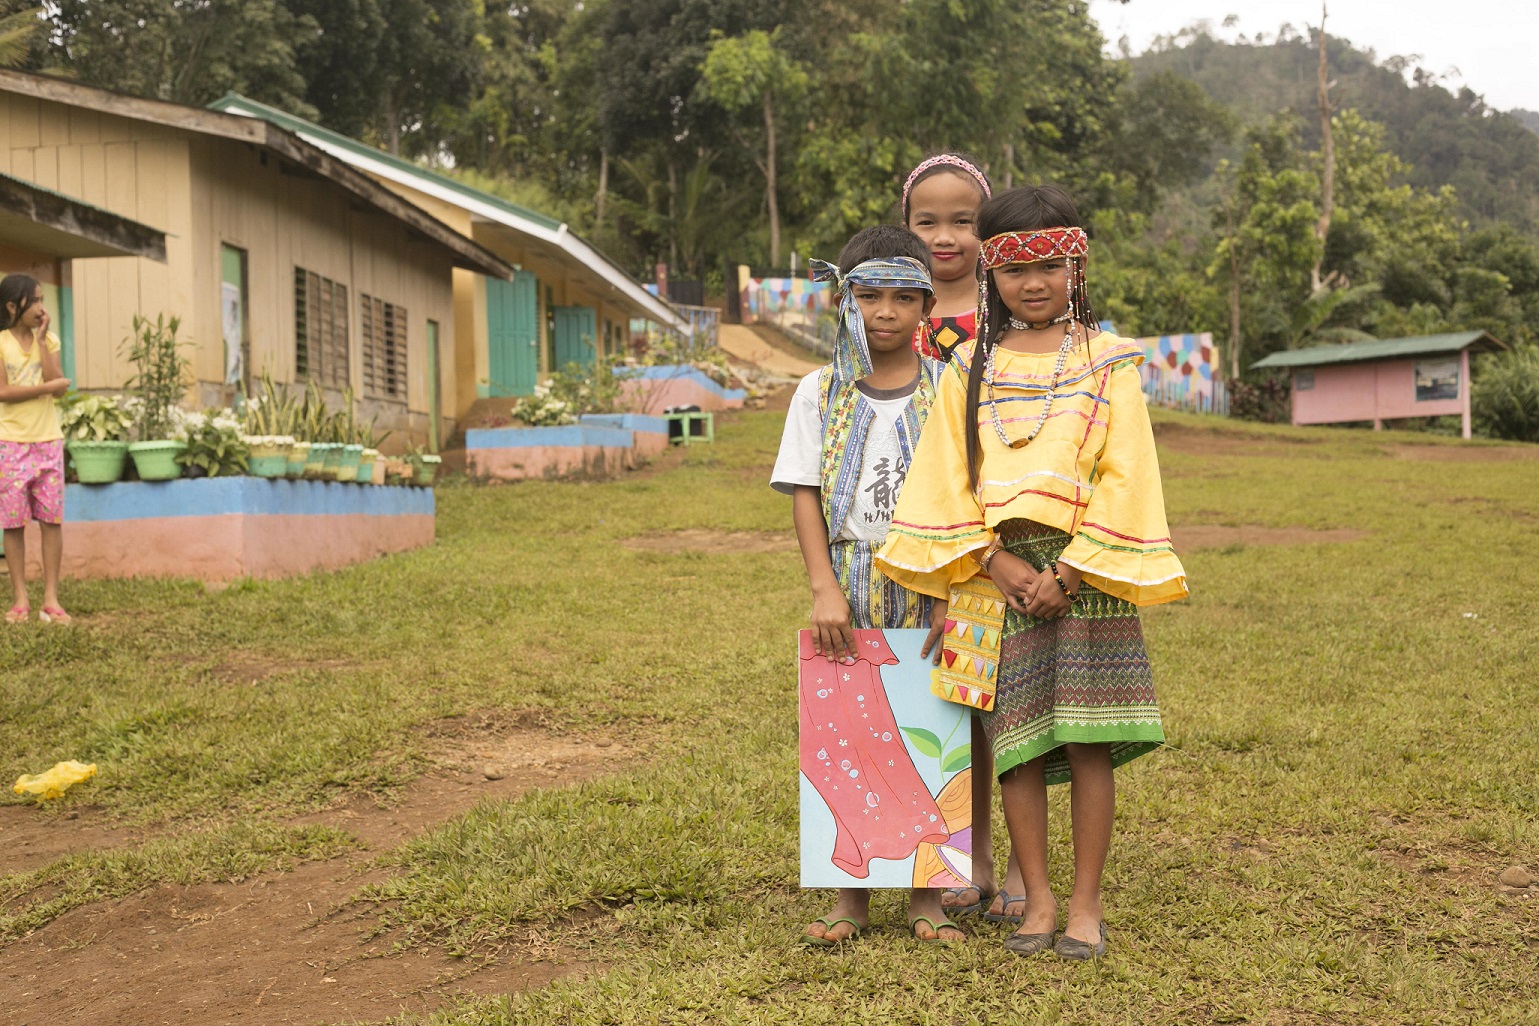 ‘Language is our only difference’ – Manobo girl to other kids